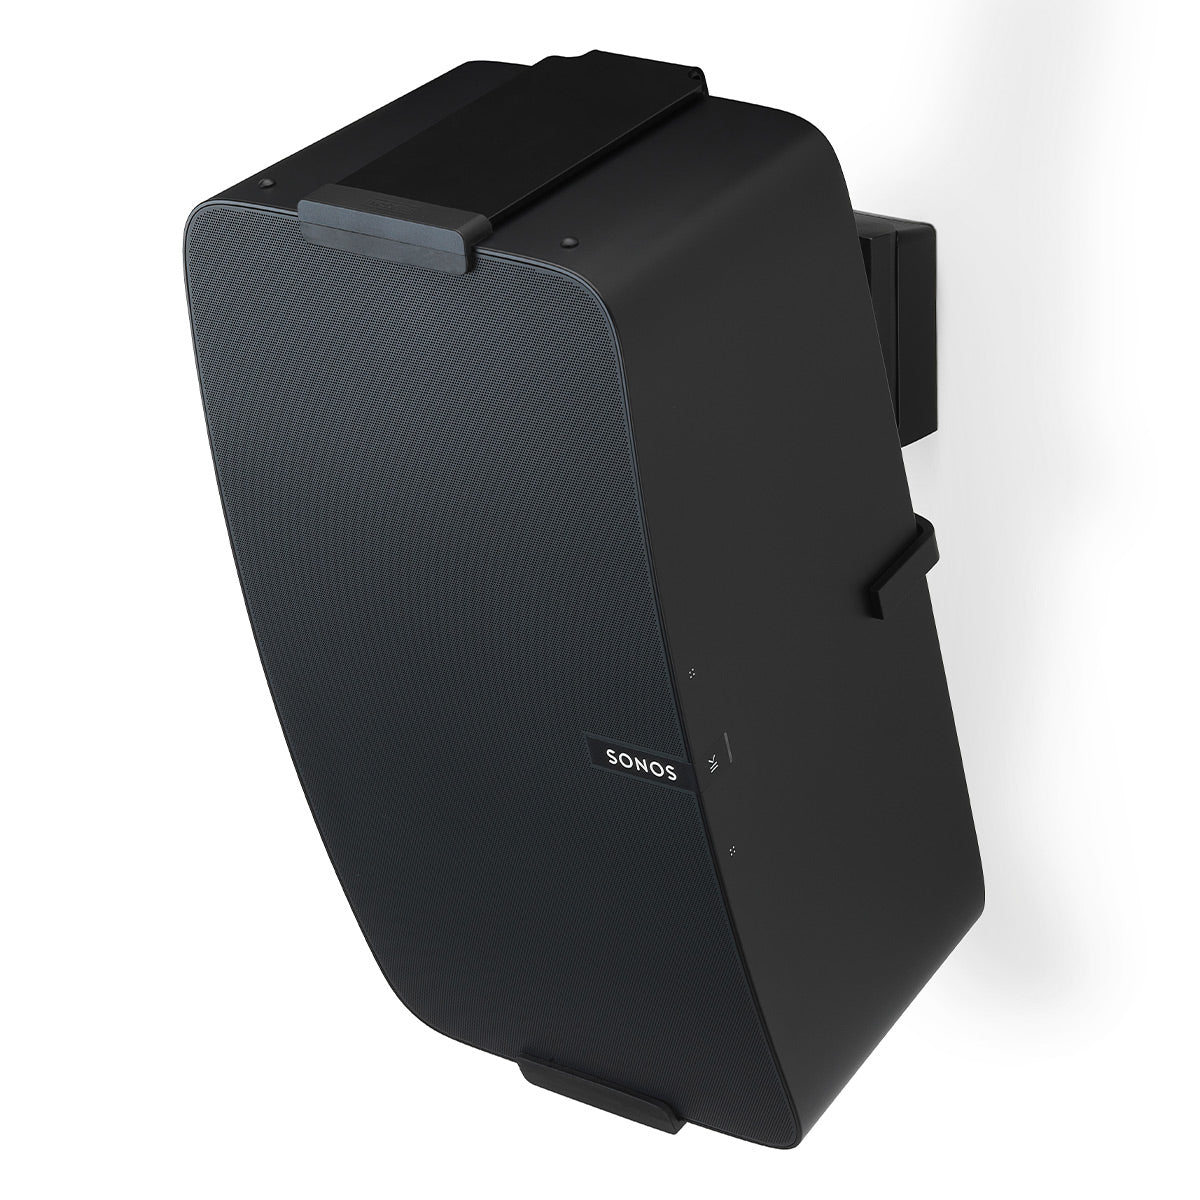 Sonos Five Wireless Speaker for Streaming Music (Black) with Flexson Vertical Wall Mount (Black) - Pair